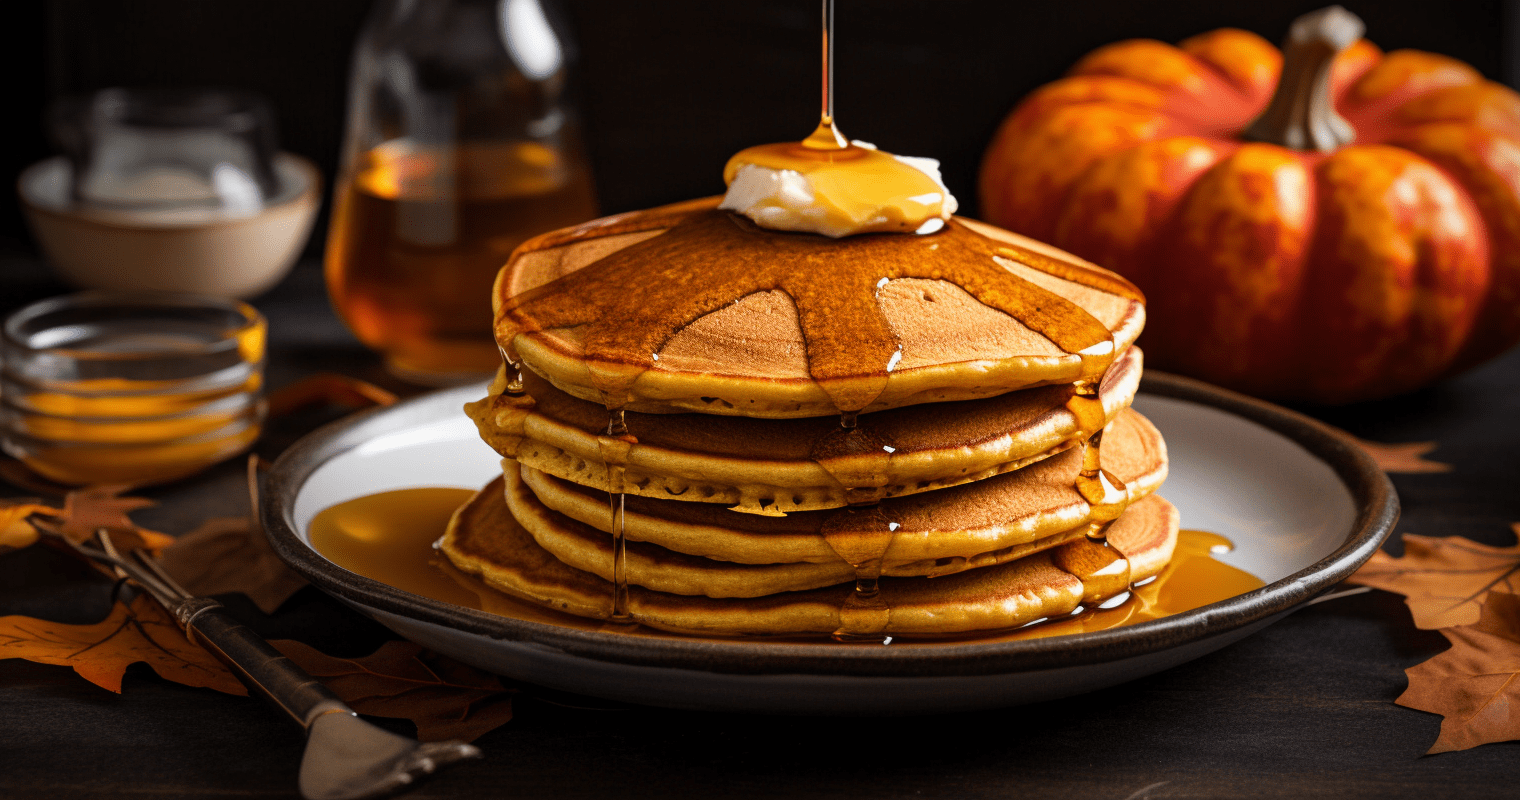 Pumpkin Pancakes with Spiced Maple Syrup Final Dish